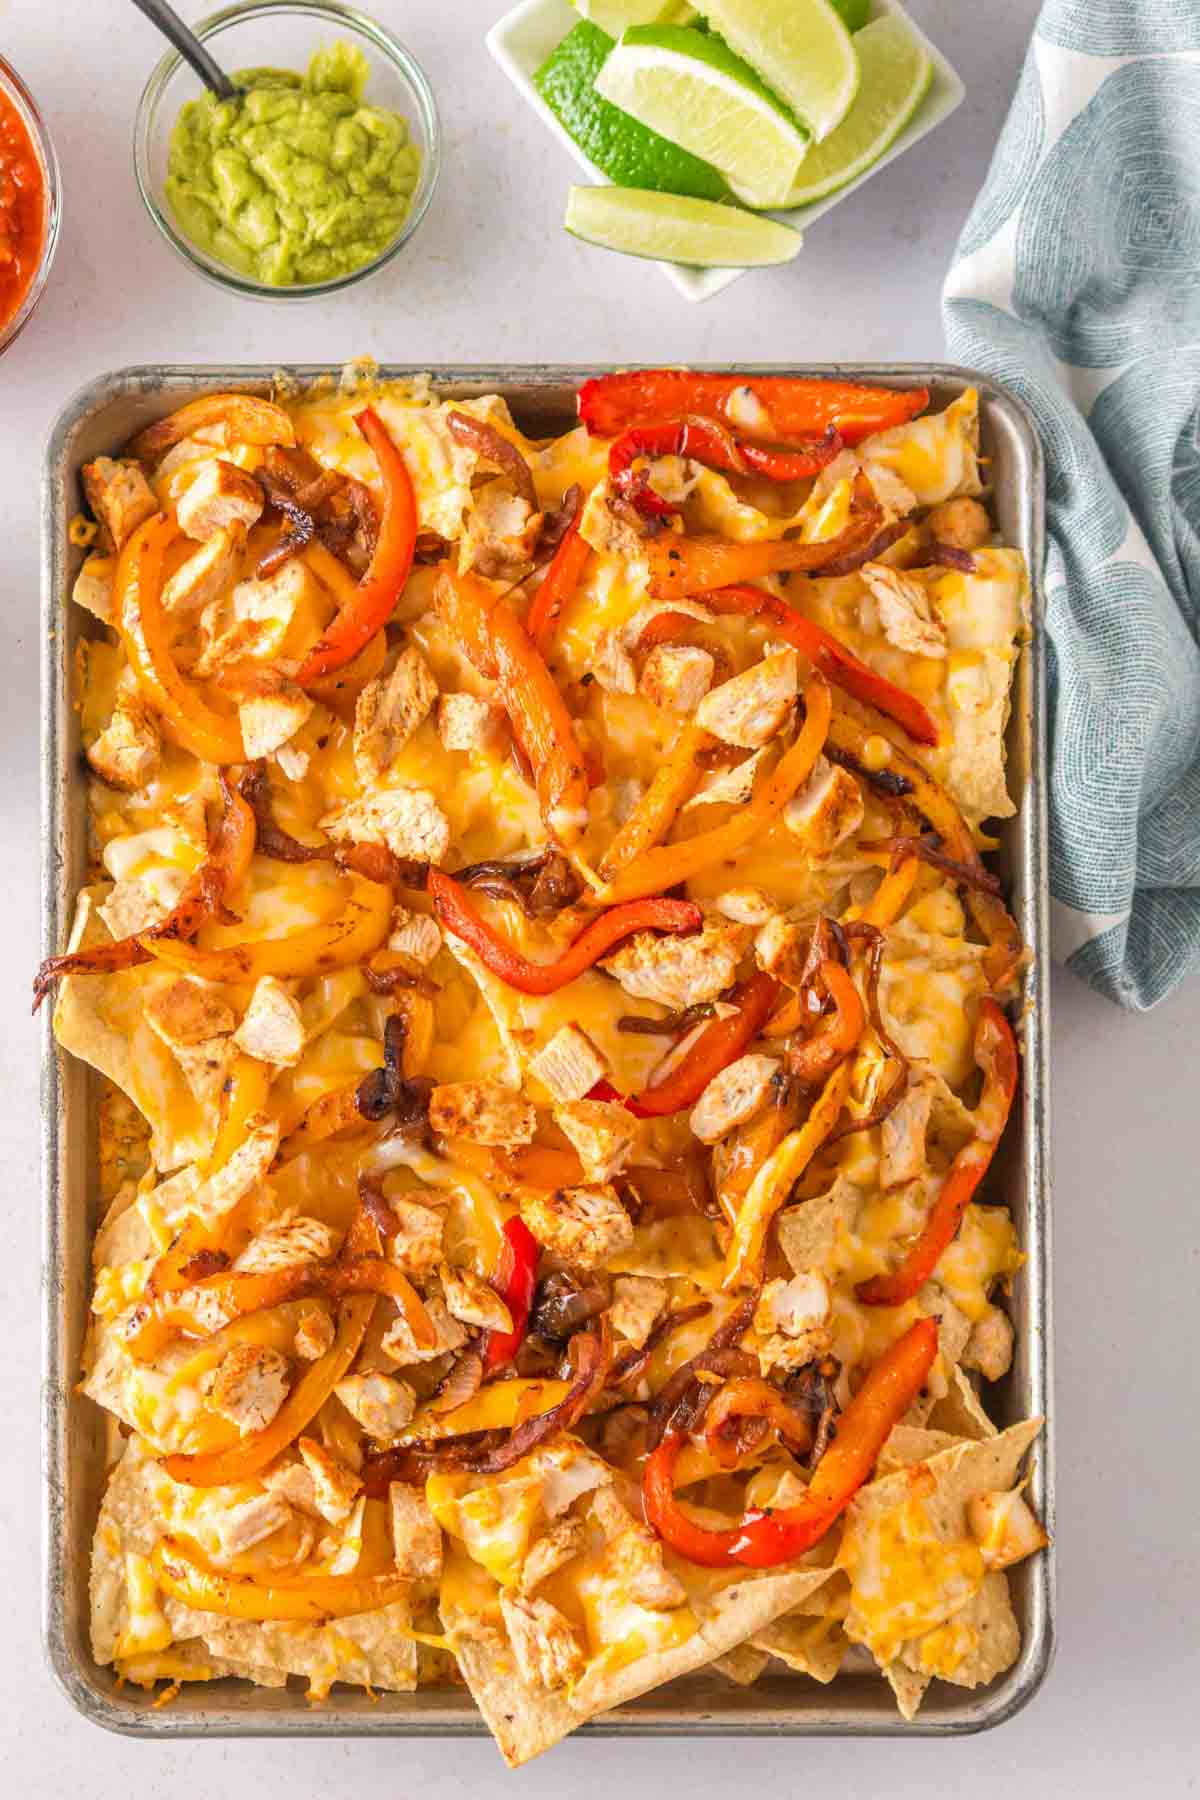 Fajita nachos out of the oven with no toppings.